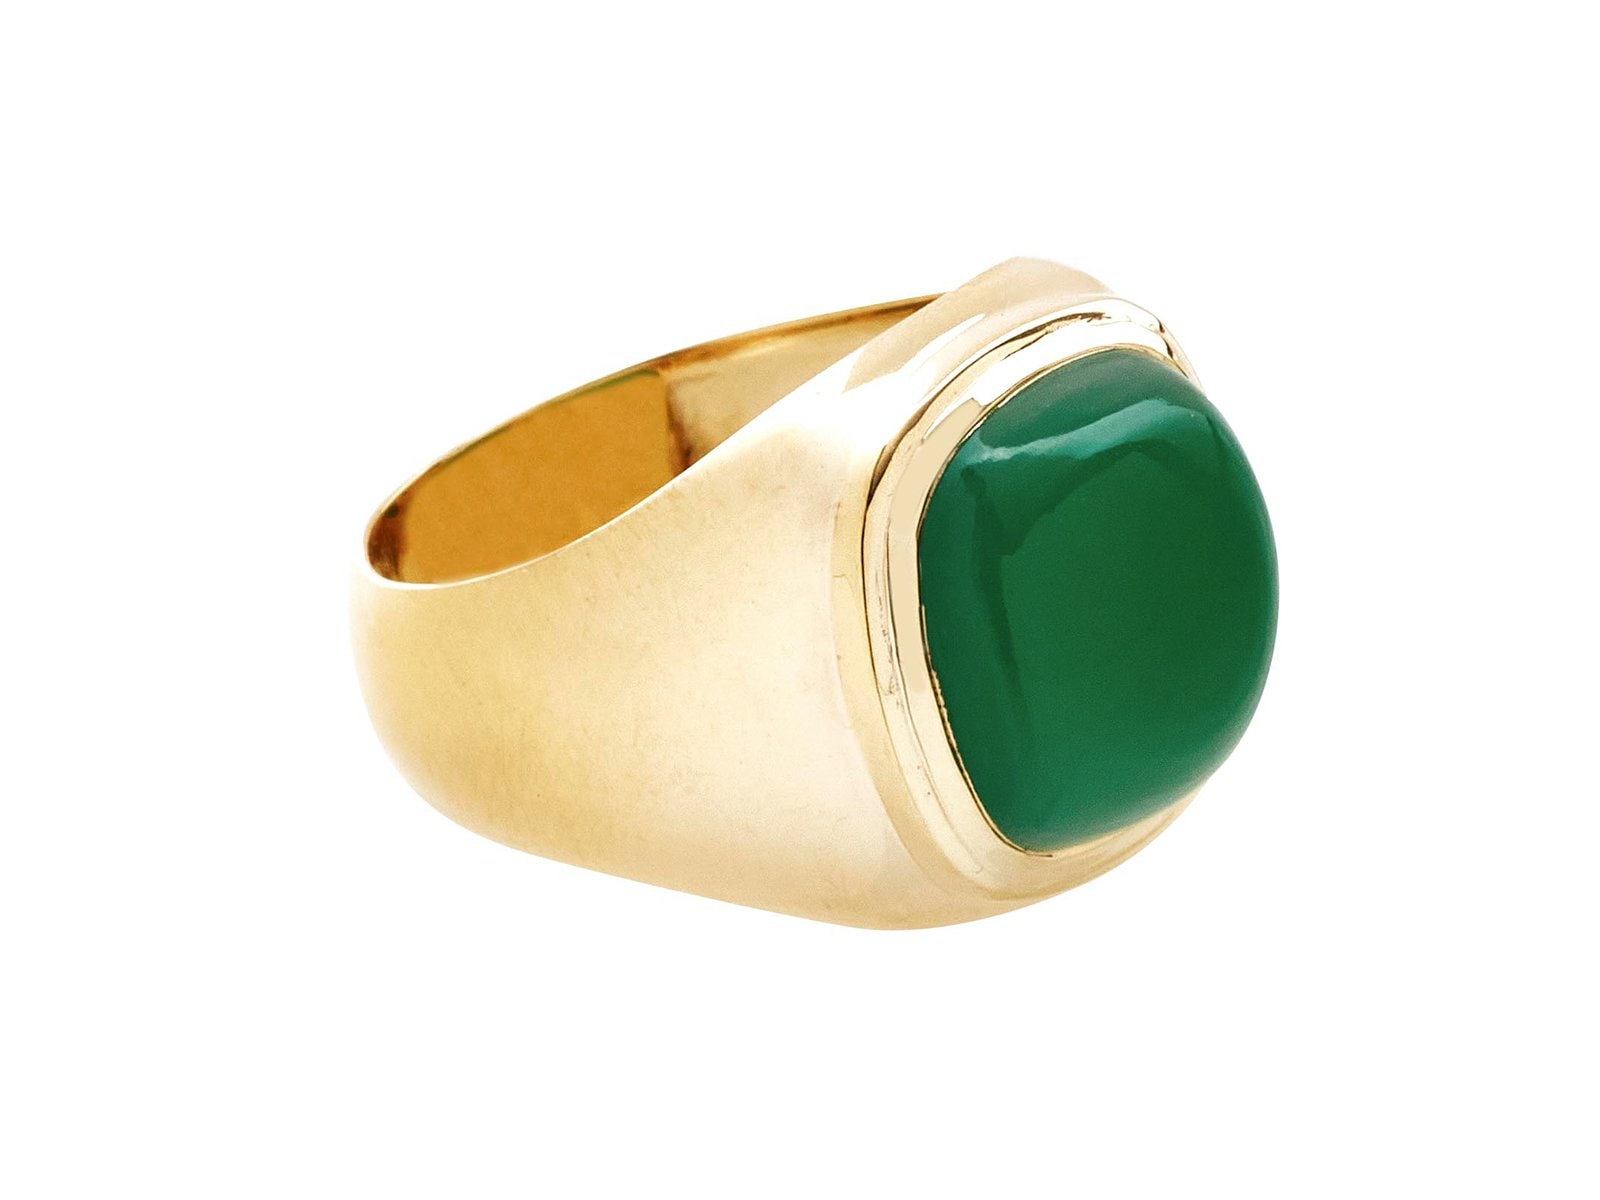 Silk & Steel Heritage ring with a gold band and a green gemstone 